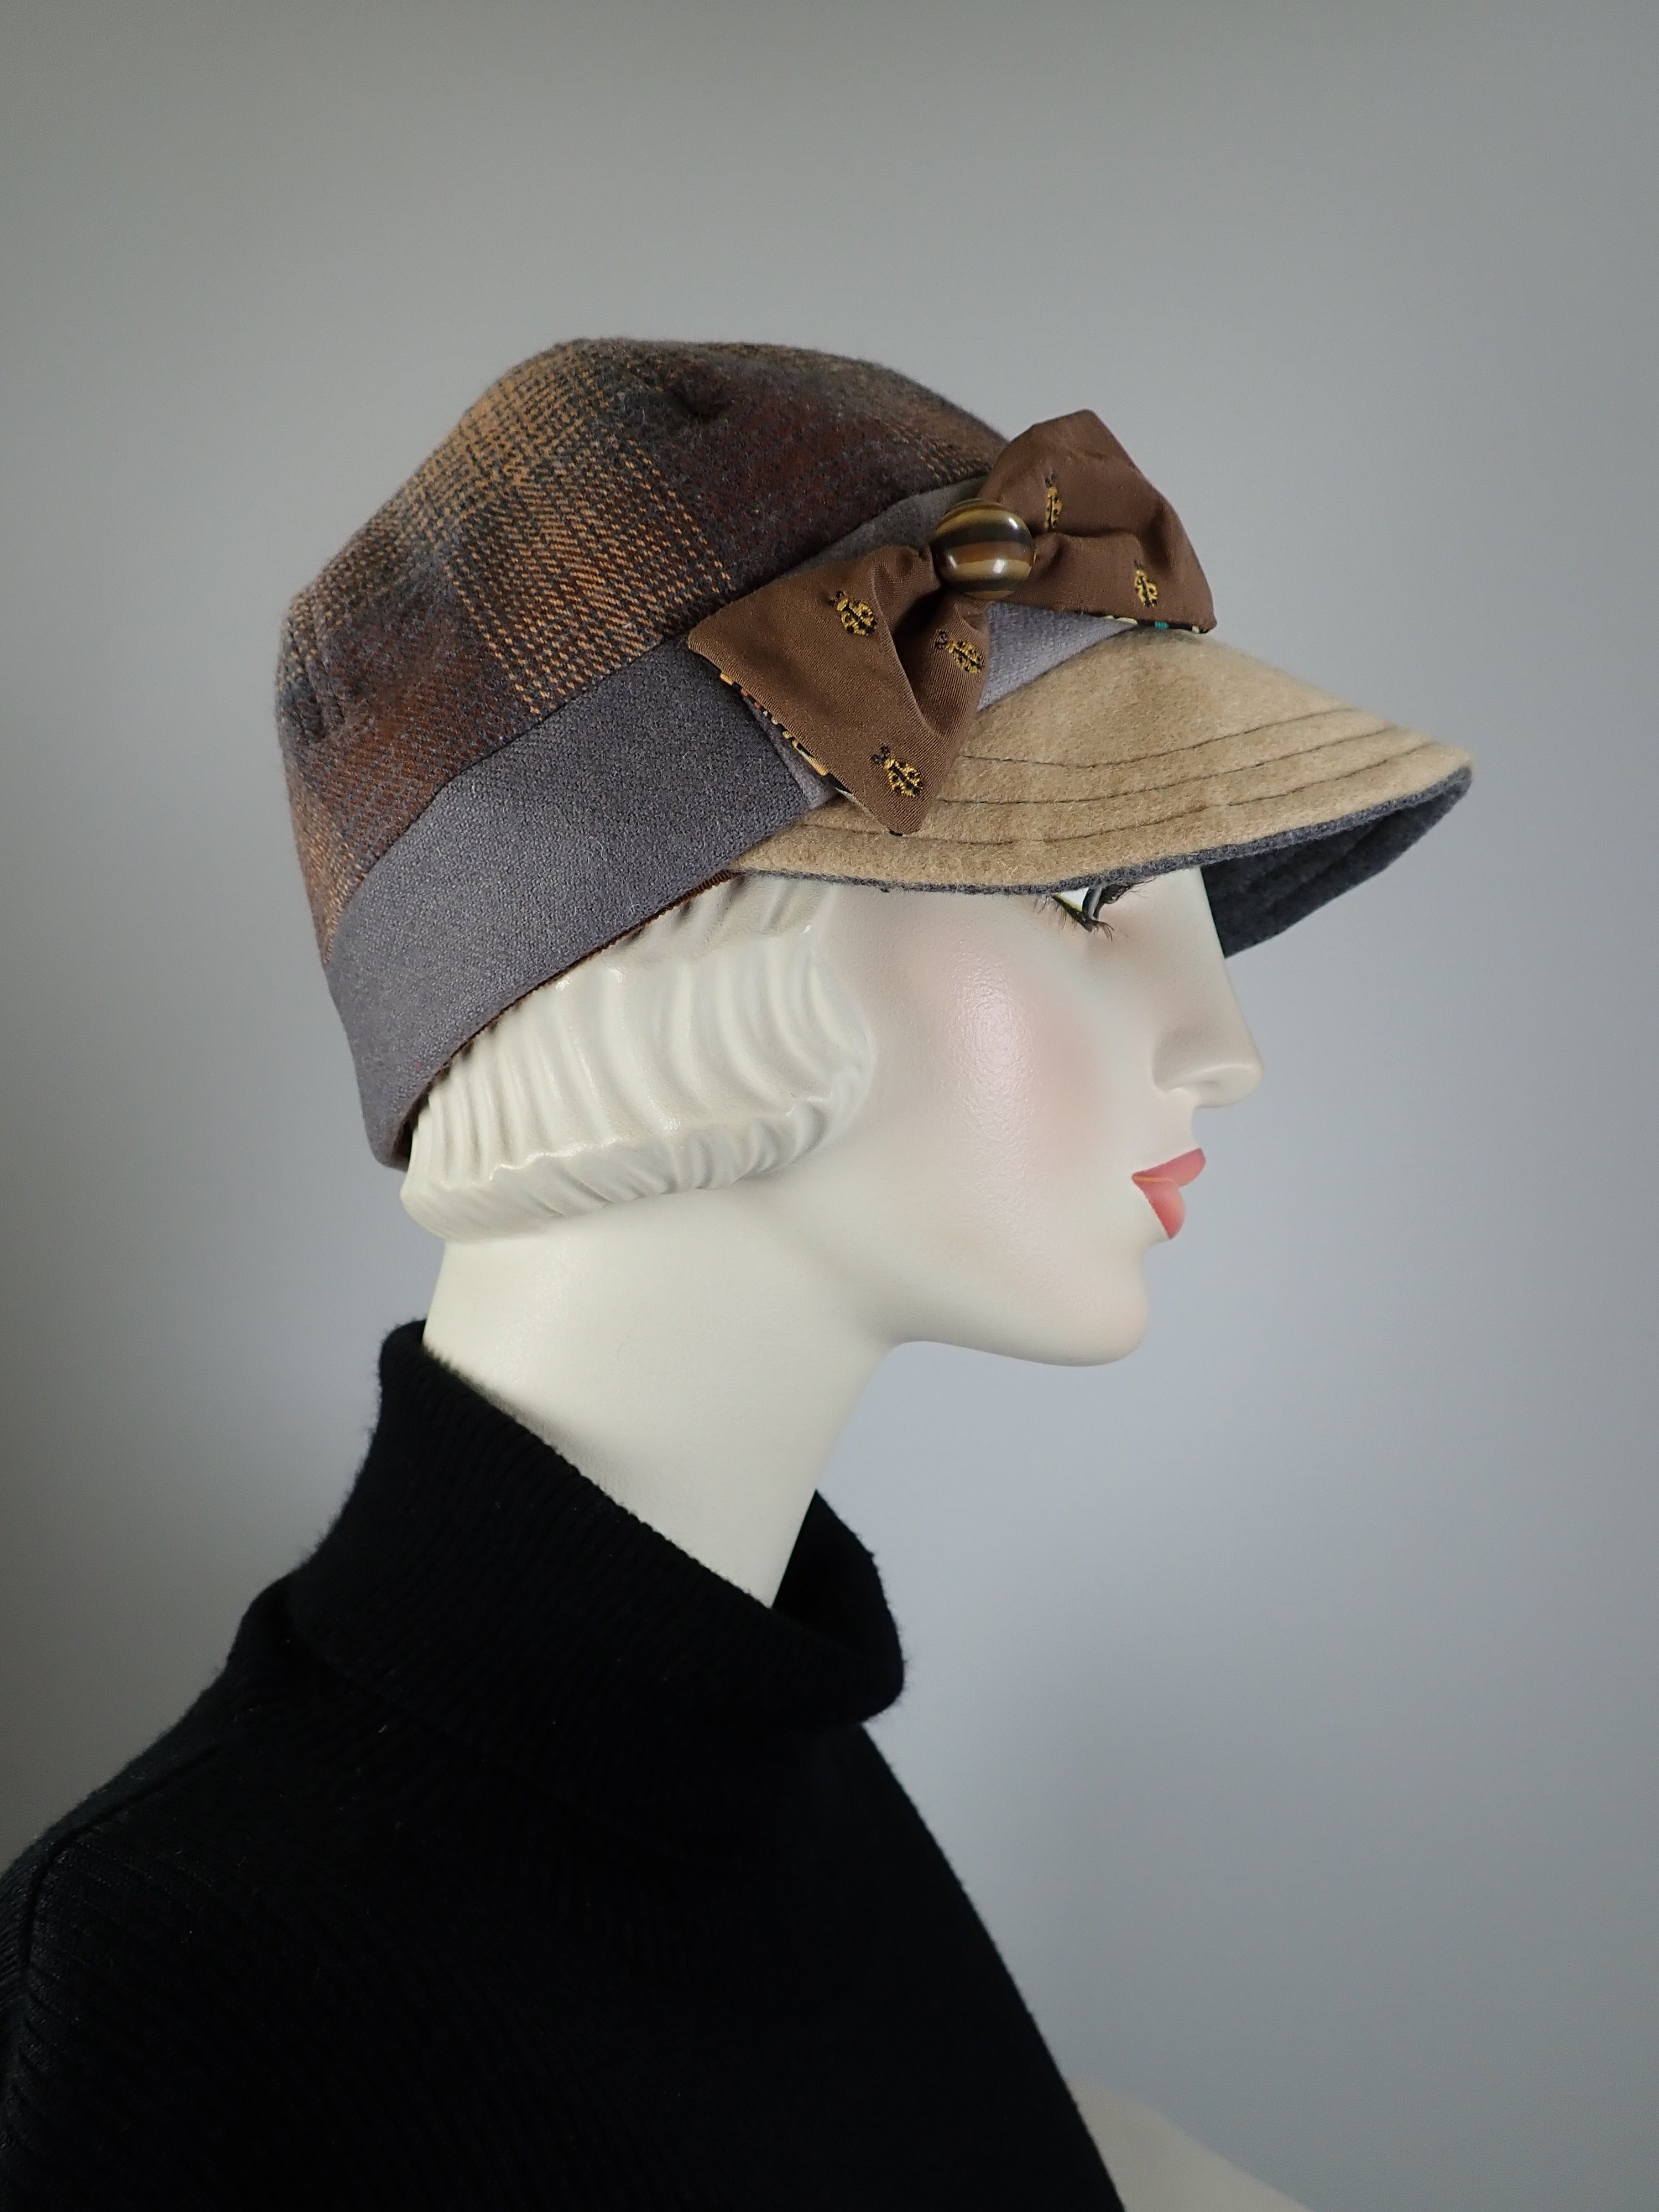 Women's winter hat baseball style. Newsboy hat gray and camel. Casual hat ladies. Warm comfy hat. Stylish fabric hat. Ladies soft hat.